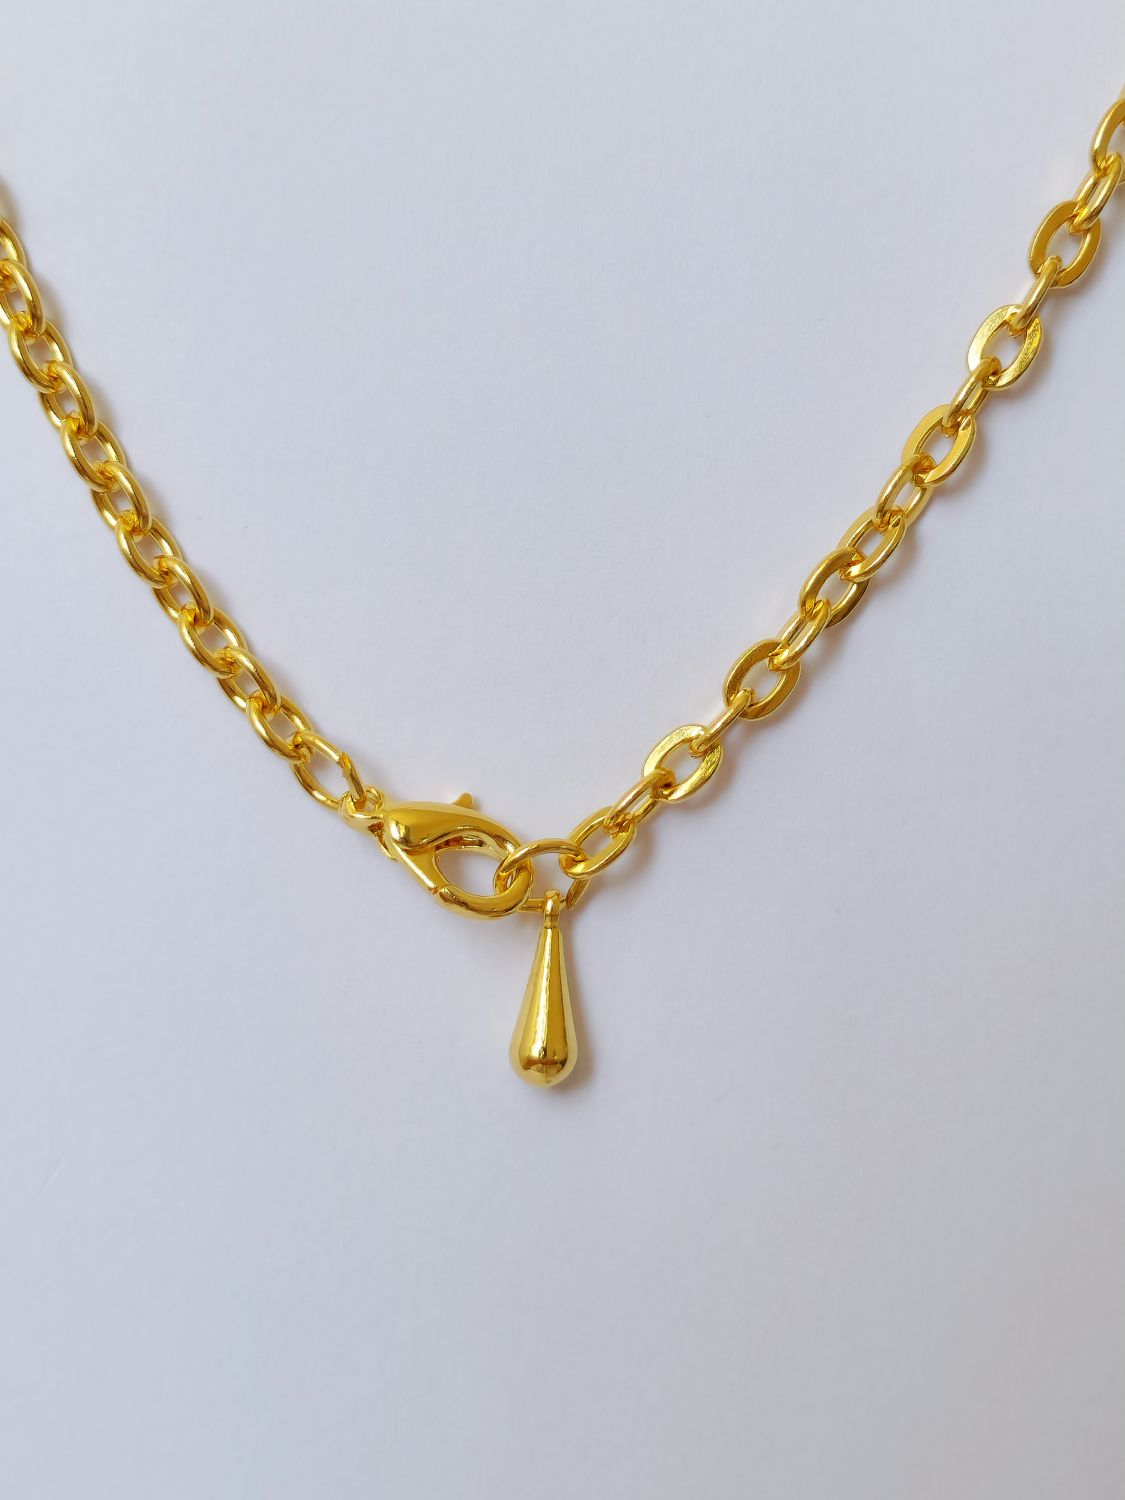 Vintage Gold Plated Cable Chain Necklace with Purple Charms